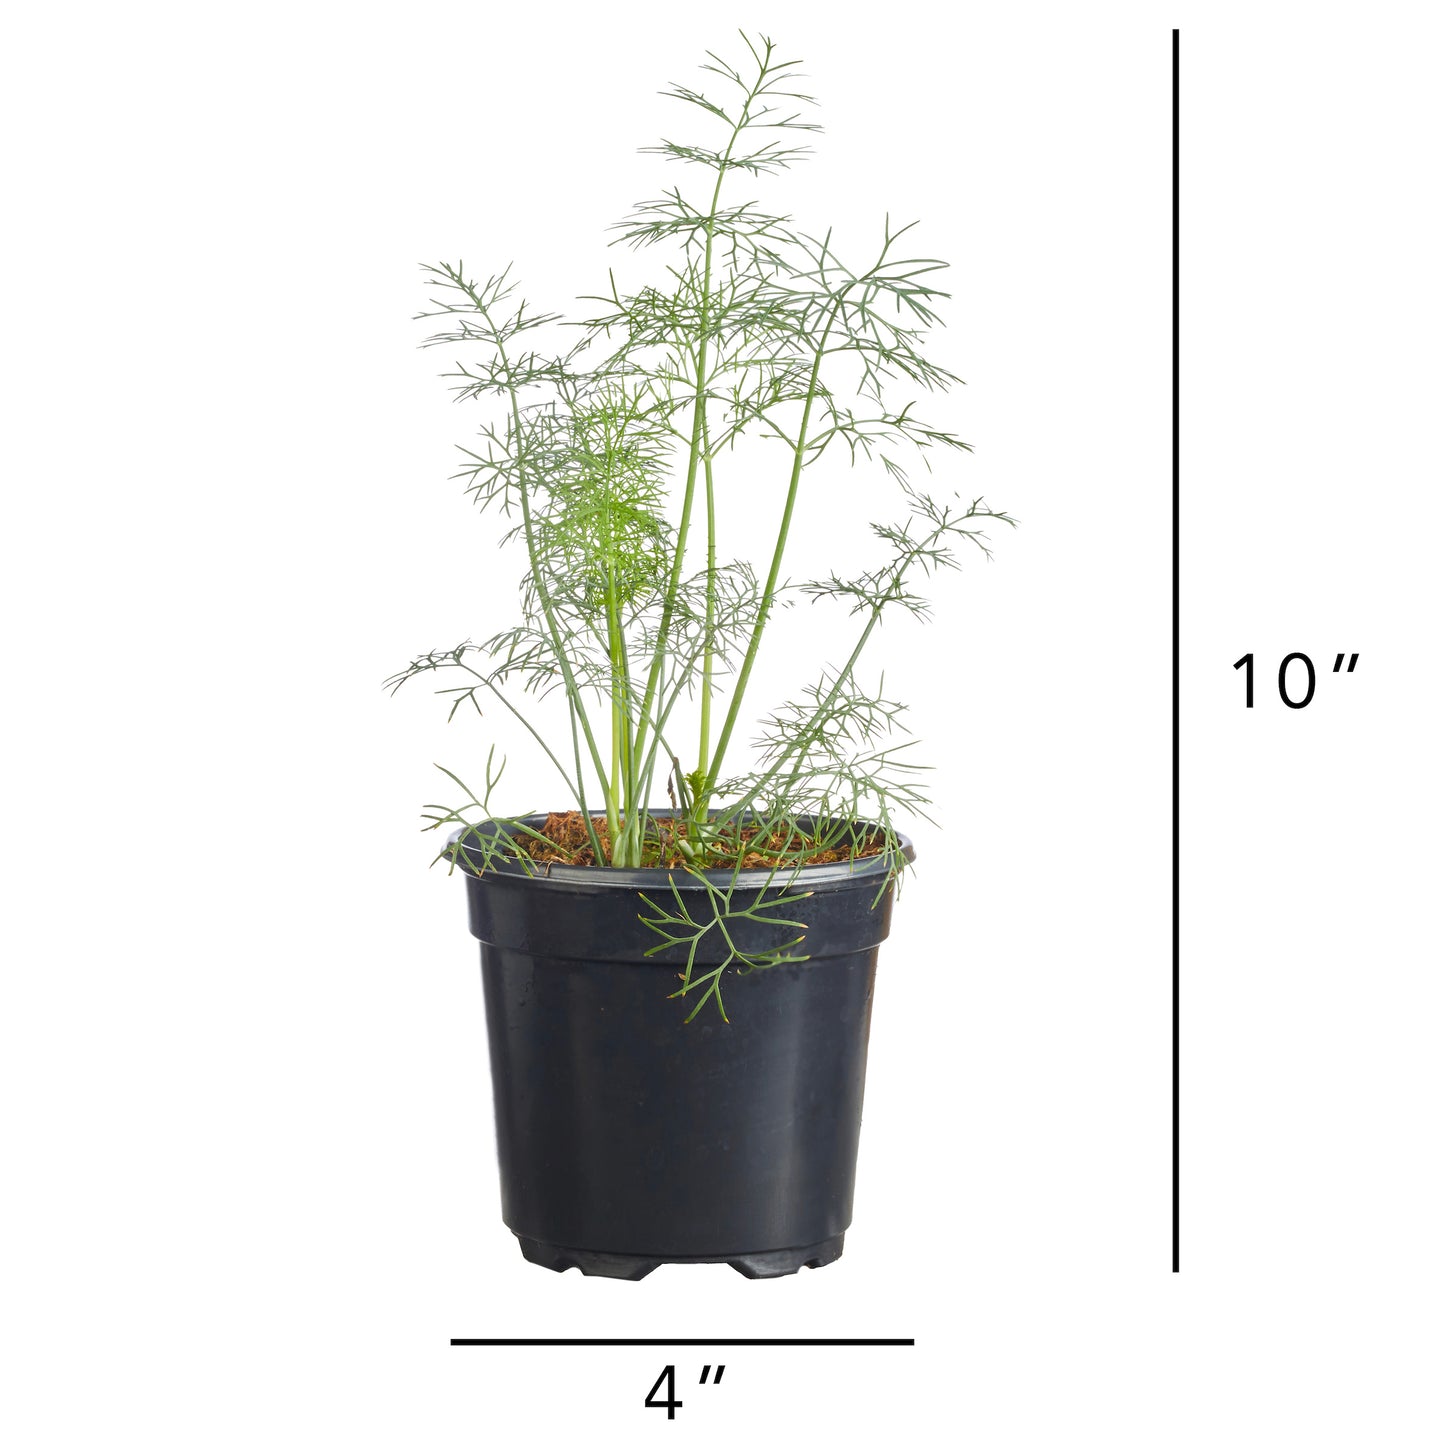 Dill Fernleaf Plantlings Plus Live Baby Plants 4in. Pot, 2-Pack